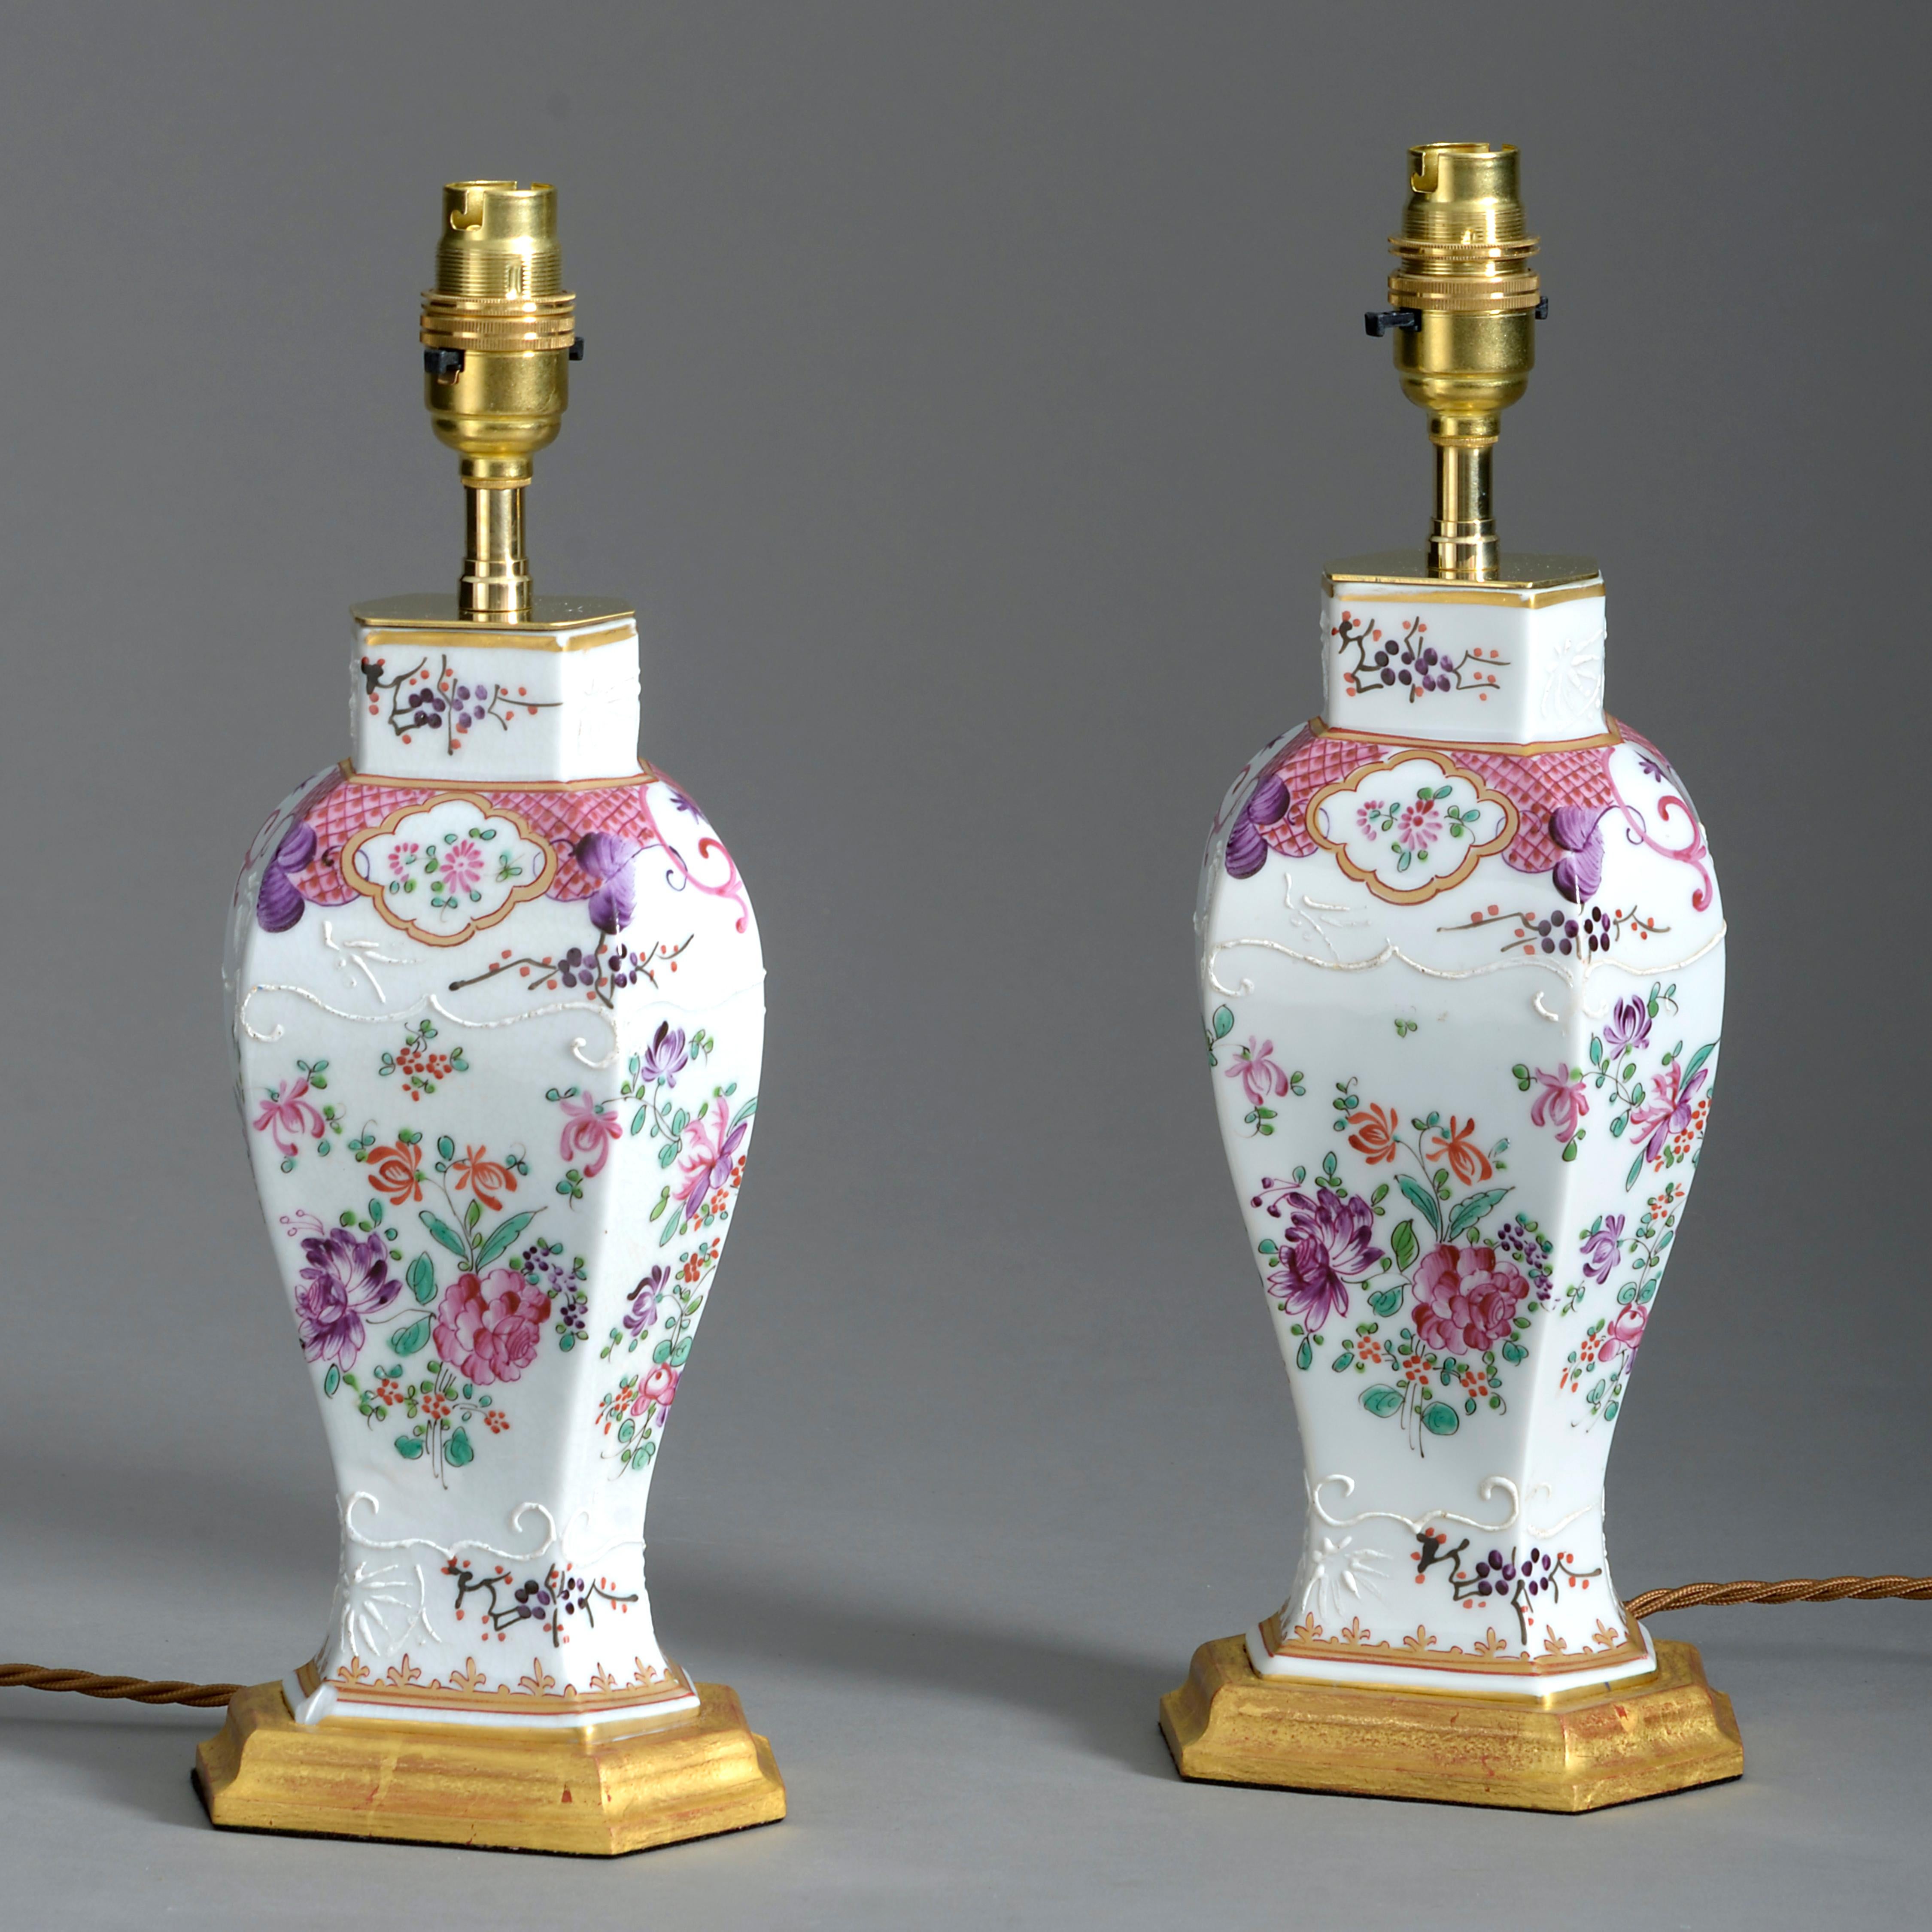 A fine pair of late 19th century famille rose porcelain vases by Samson in the Qianlong taste, of hexagonal baluster form and decorated throughout with floral vignettes. Now mounted upon water gilded bases and wired as table lamps.

Dimensions